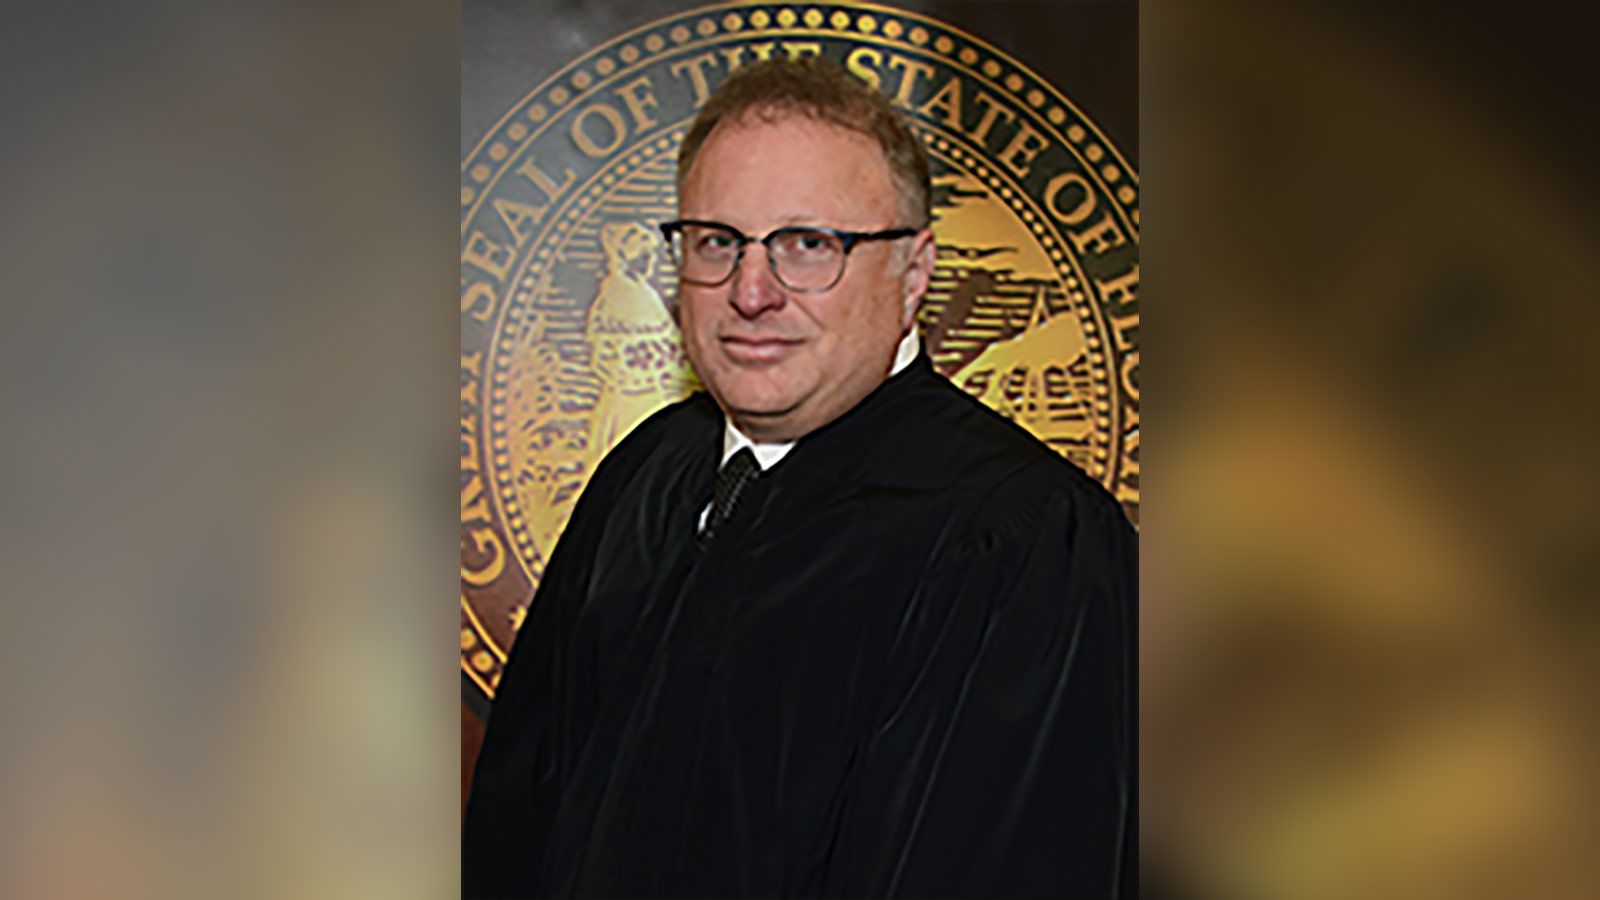 Eleventh Circuit of Florida Judge Martin Zilber resigned on Friday.